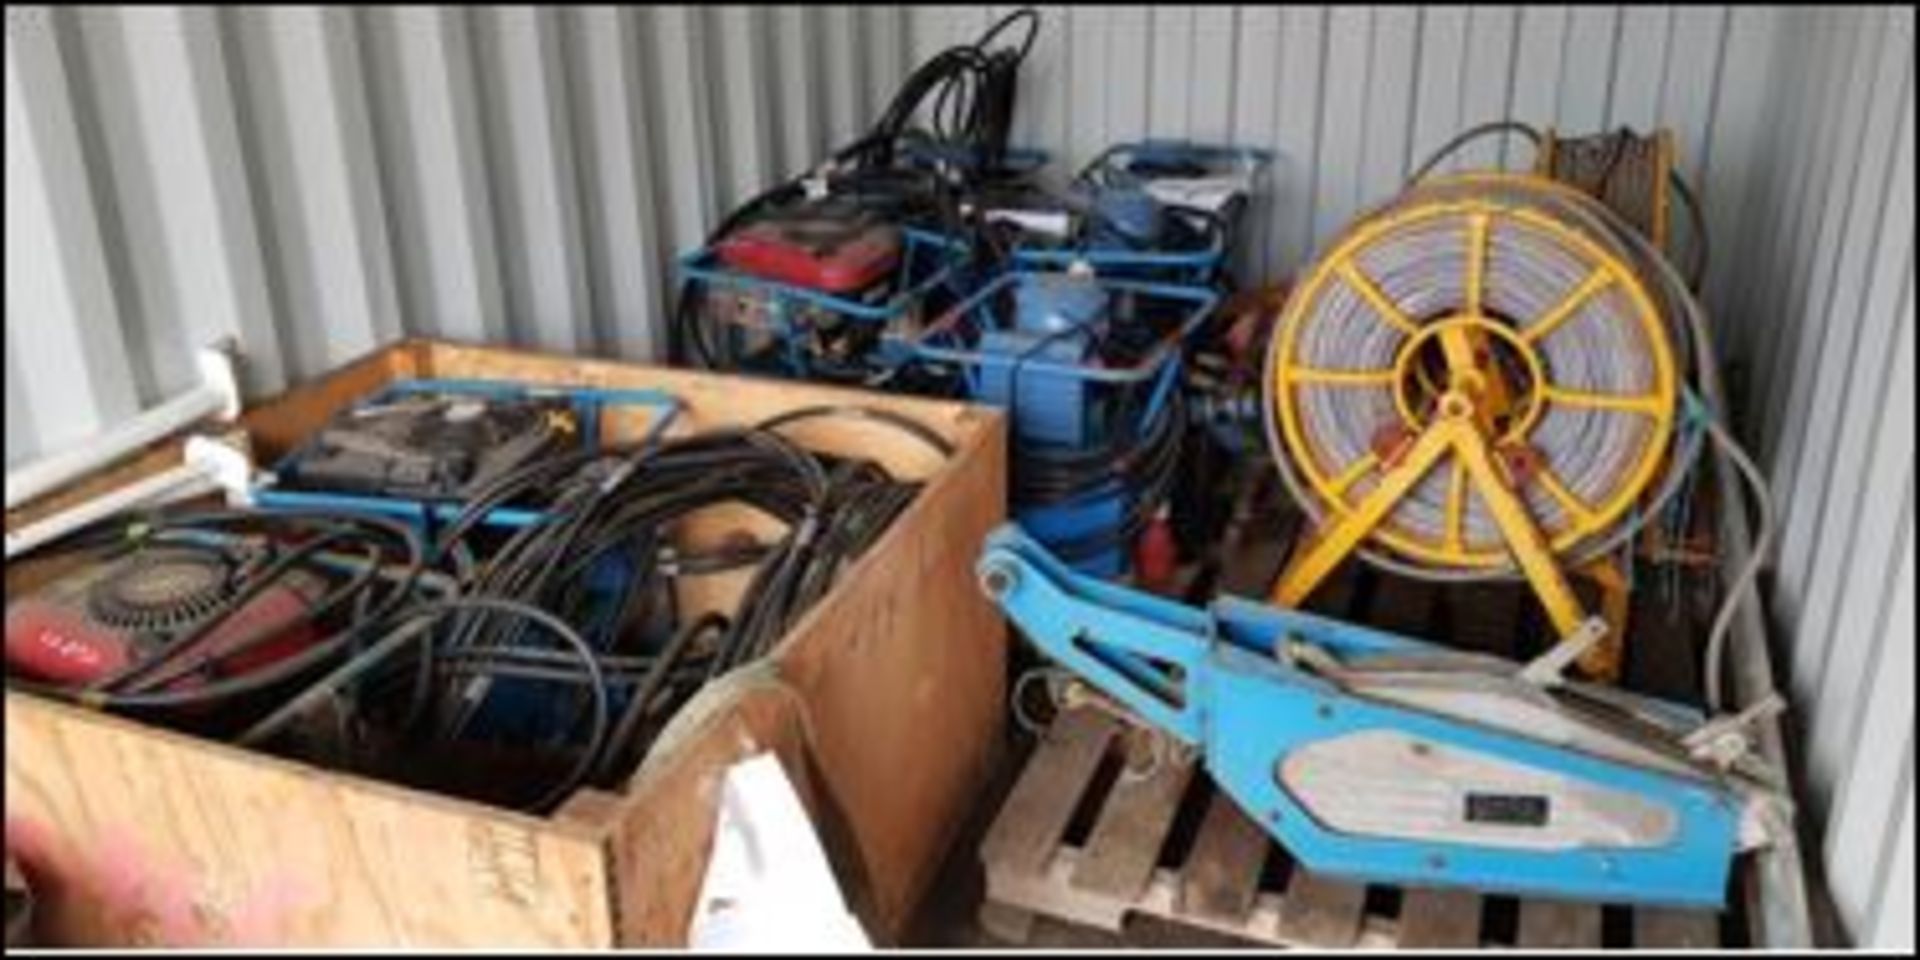 TRACTEL HYDRAULIC SUPERTIRFOR SYSTEM 9 x TIRFORS 6 x POWER PACKS 3 x WIRE REELS